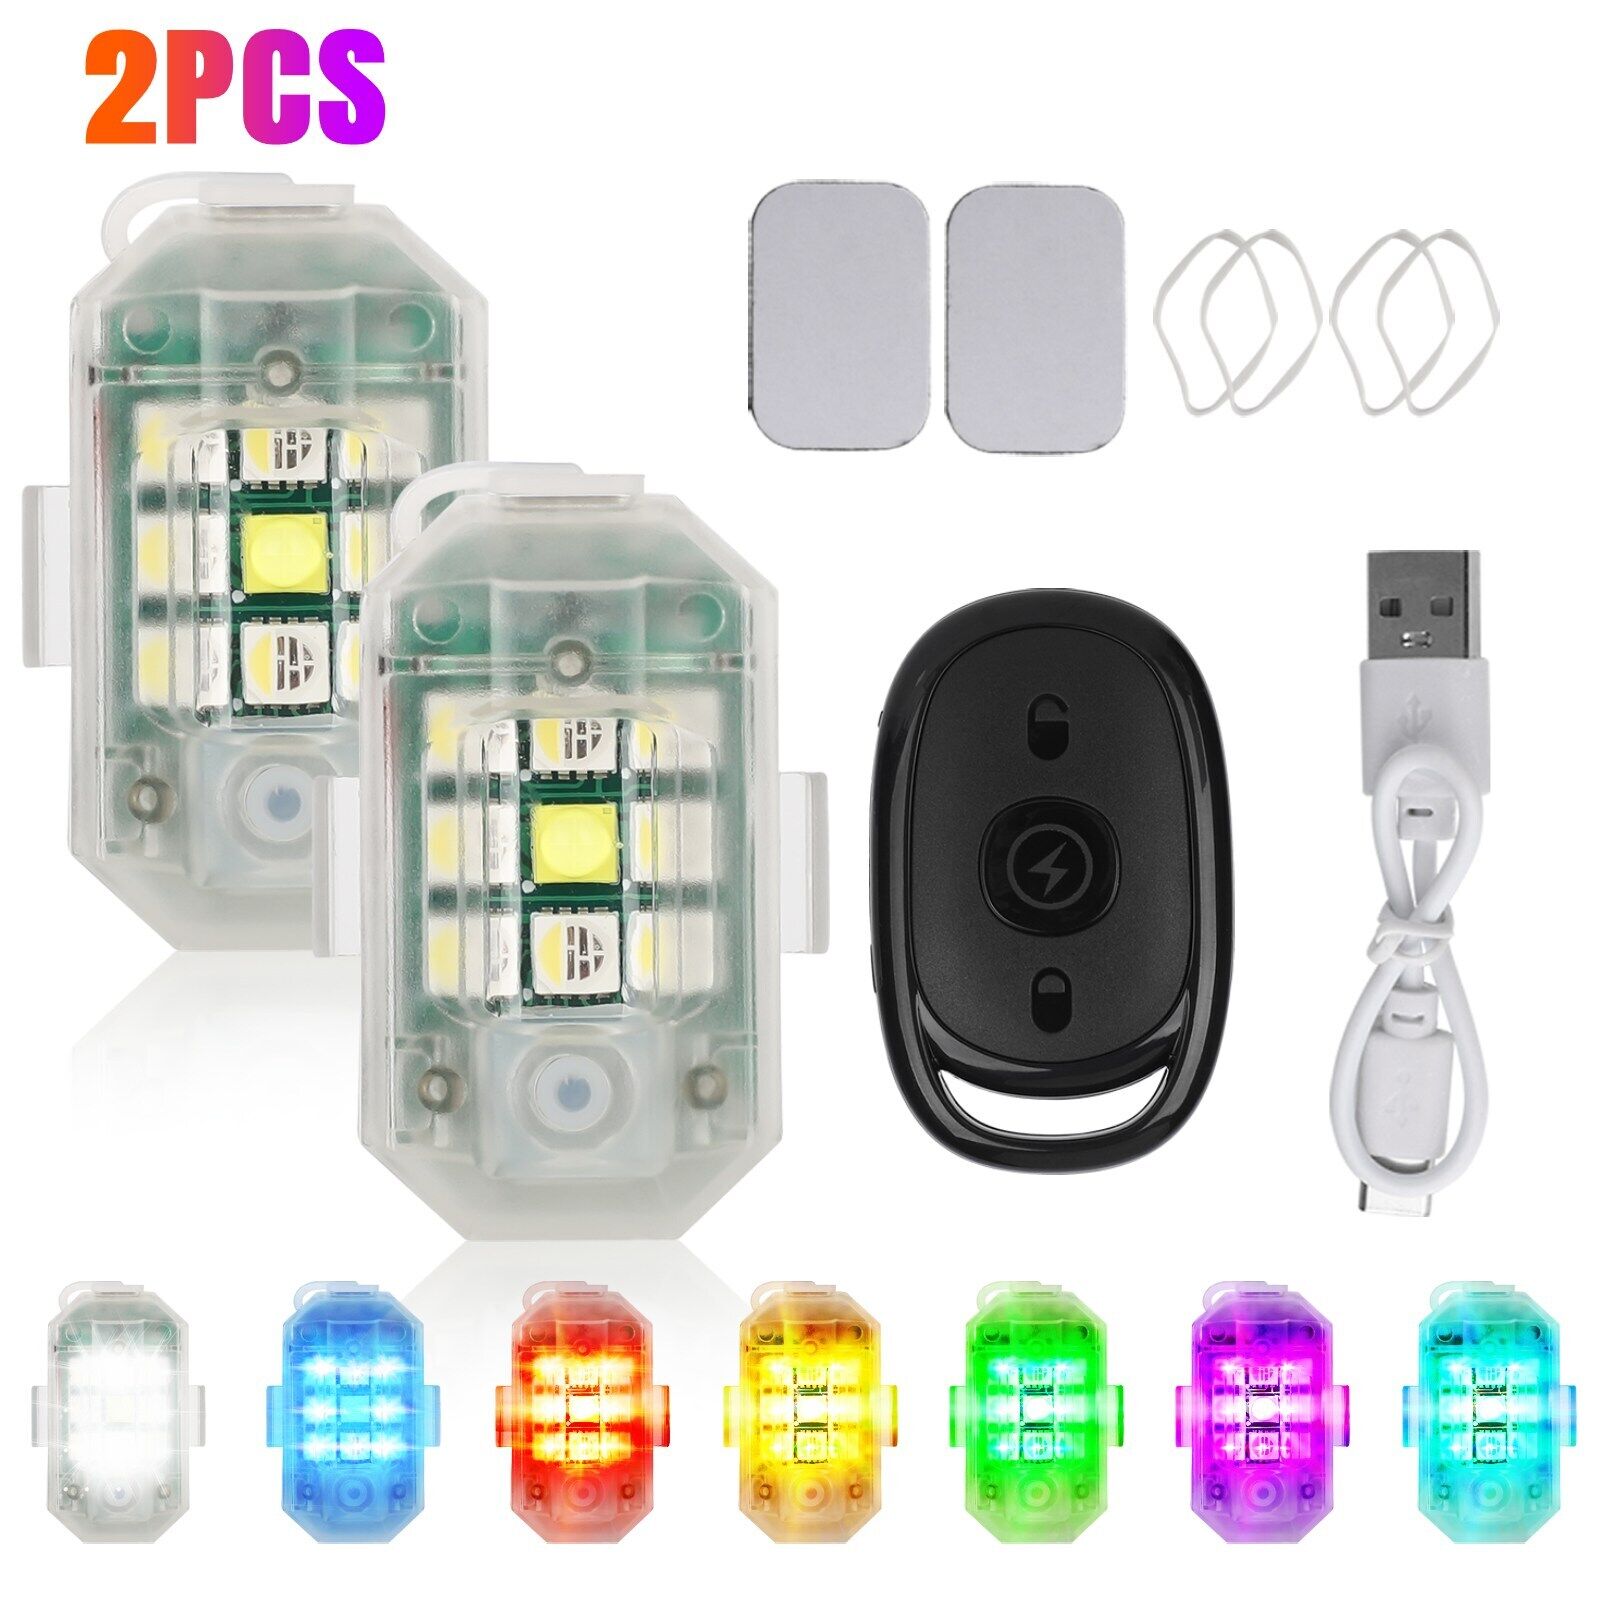 4PCS Car Rechargeable Flashing Lights 7 Colors Wireless Remote Control LED Light